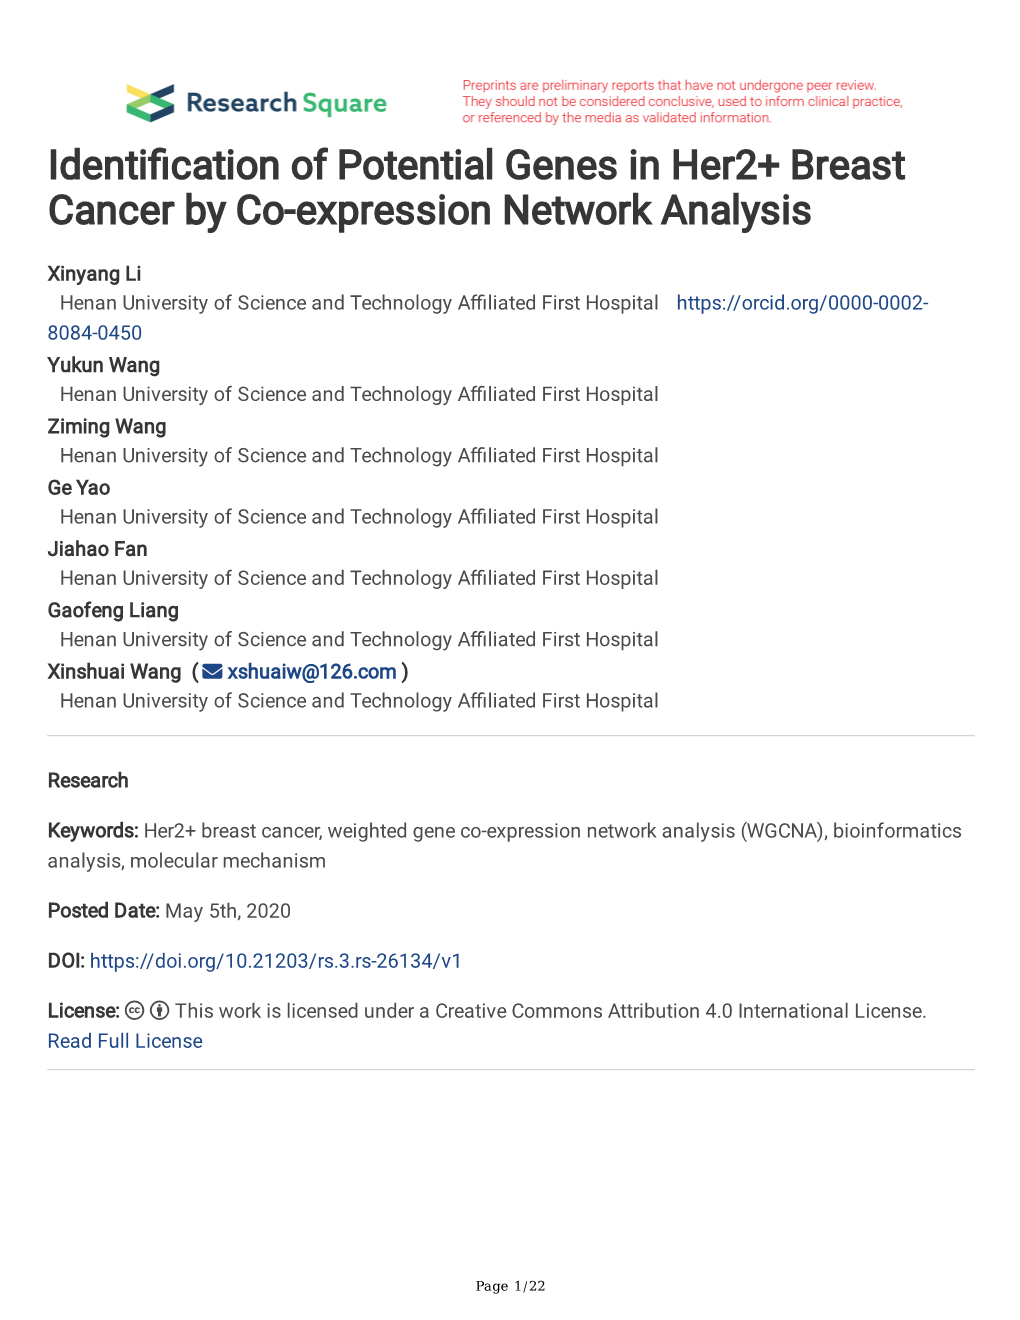 Identi Cation of Potential Genes in Her2+ Breast Cancer by Co